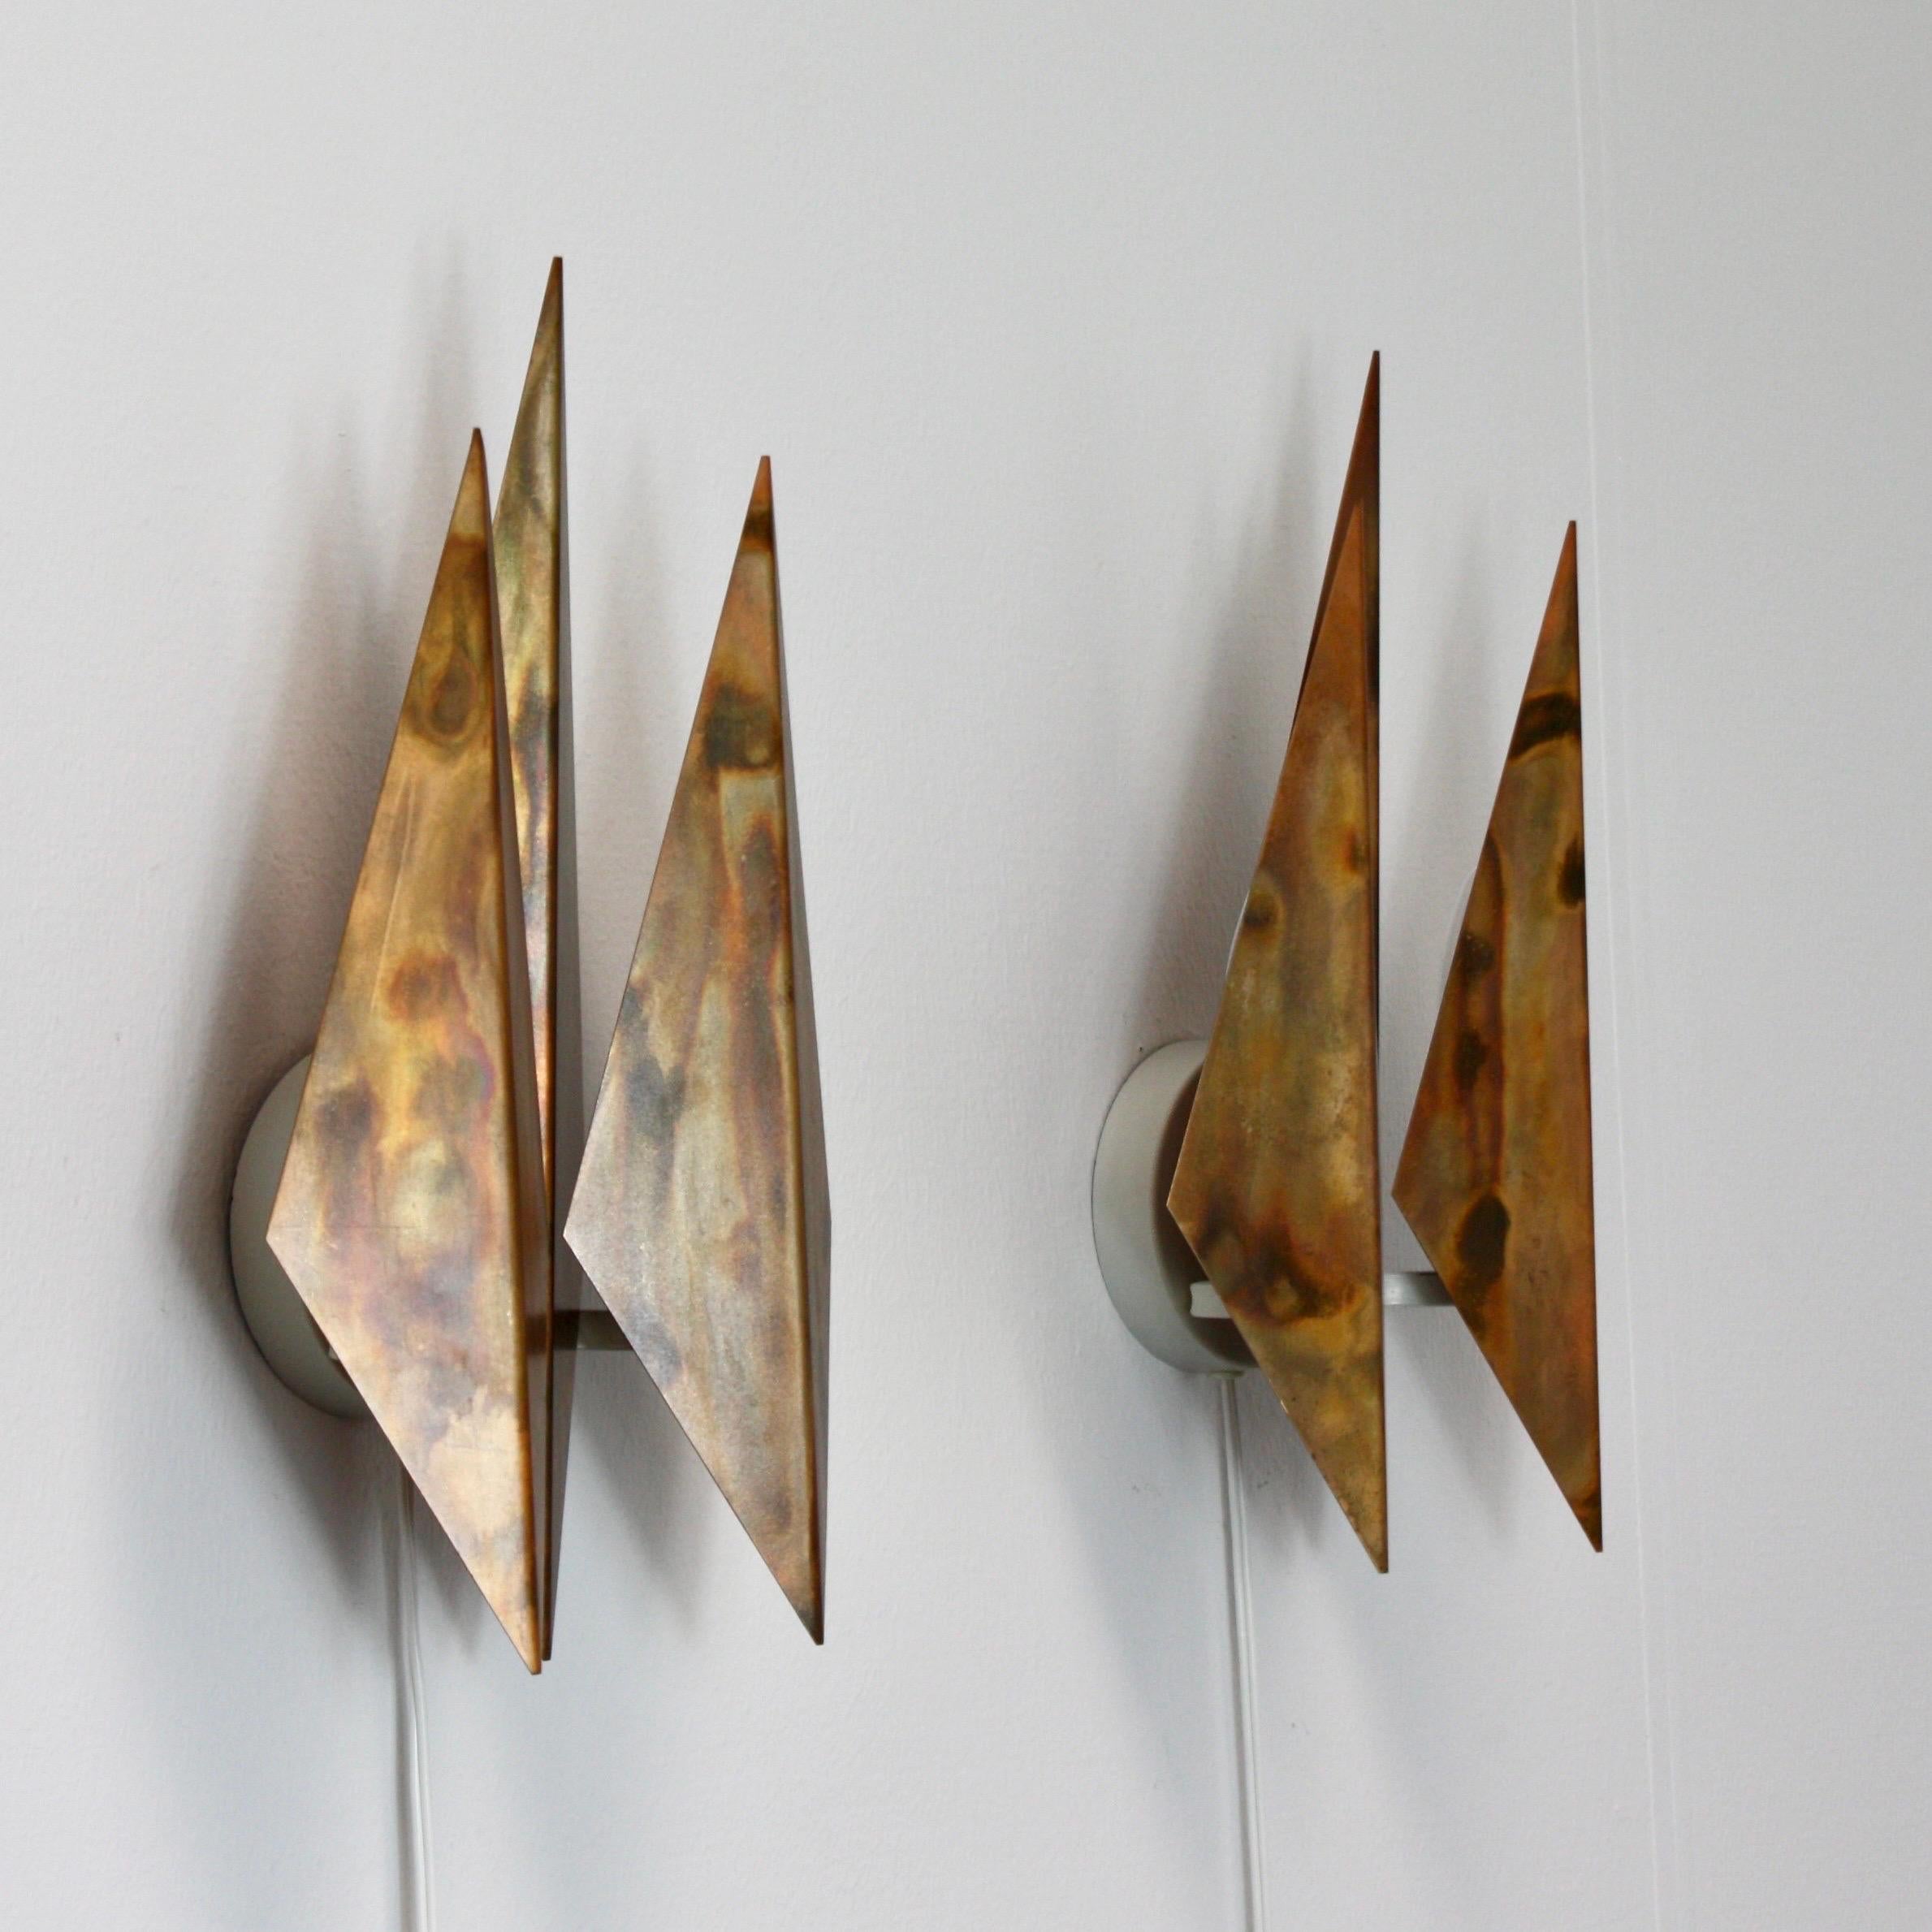 Pair of Copper Wall Lamps by Svend Aage Holm Sorensen, 1960s, Denmark For Sale 5